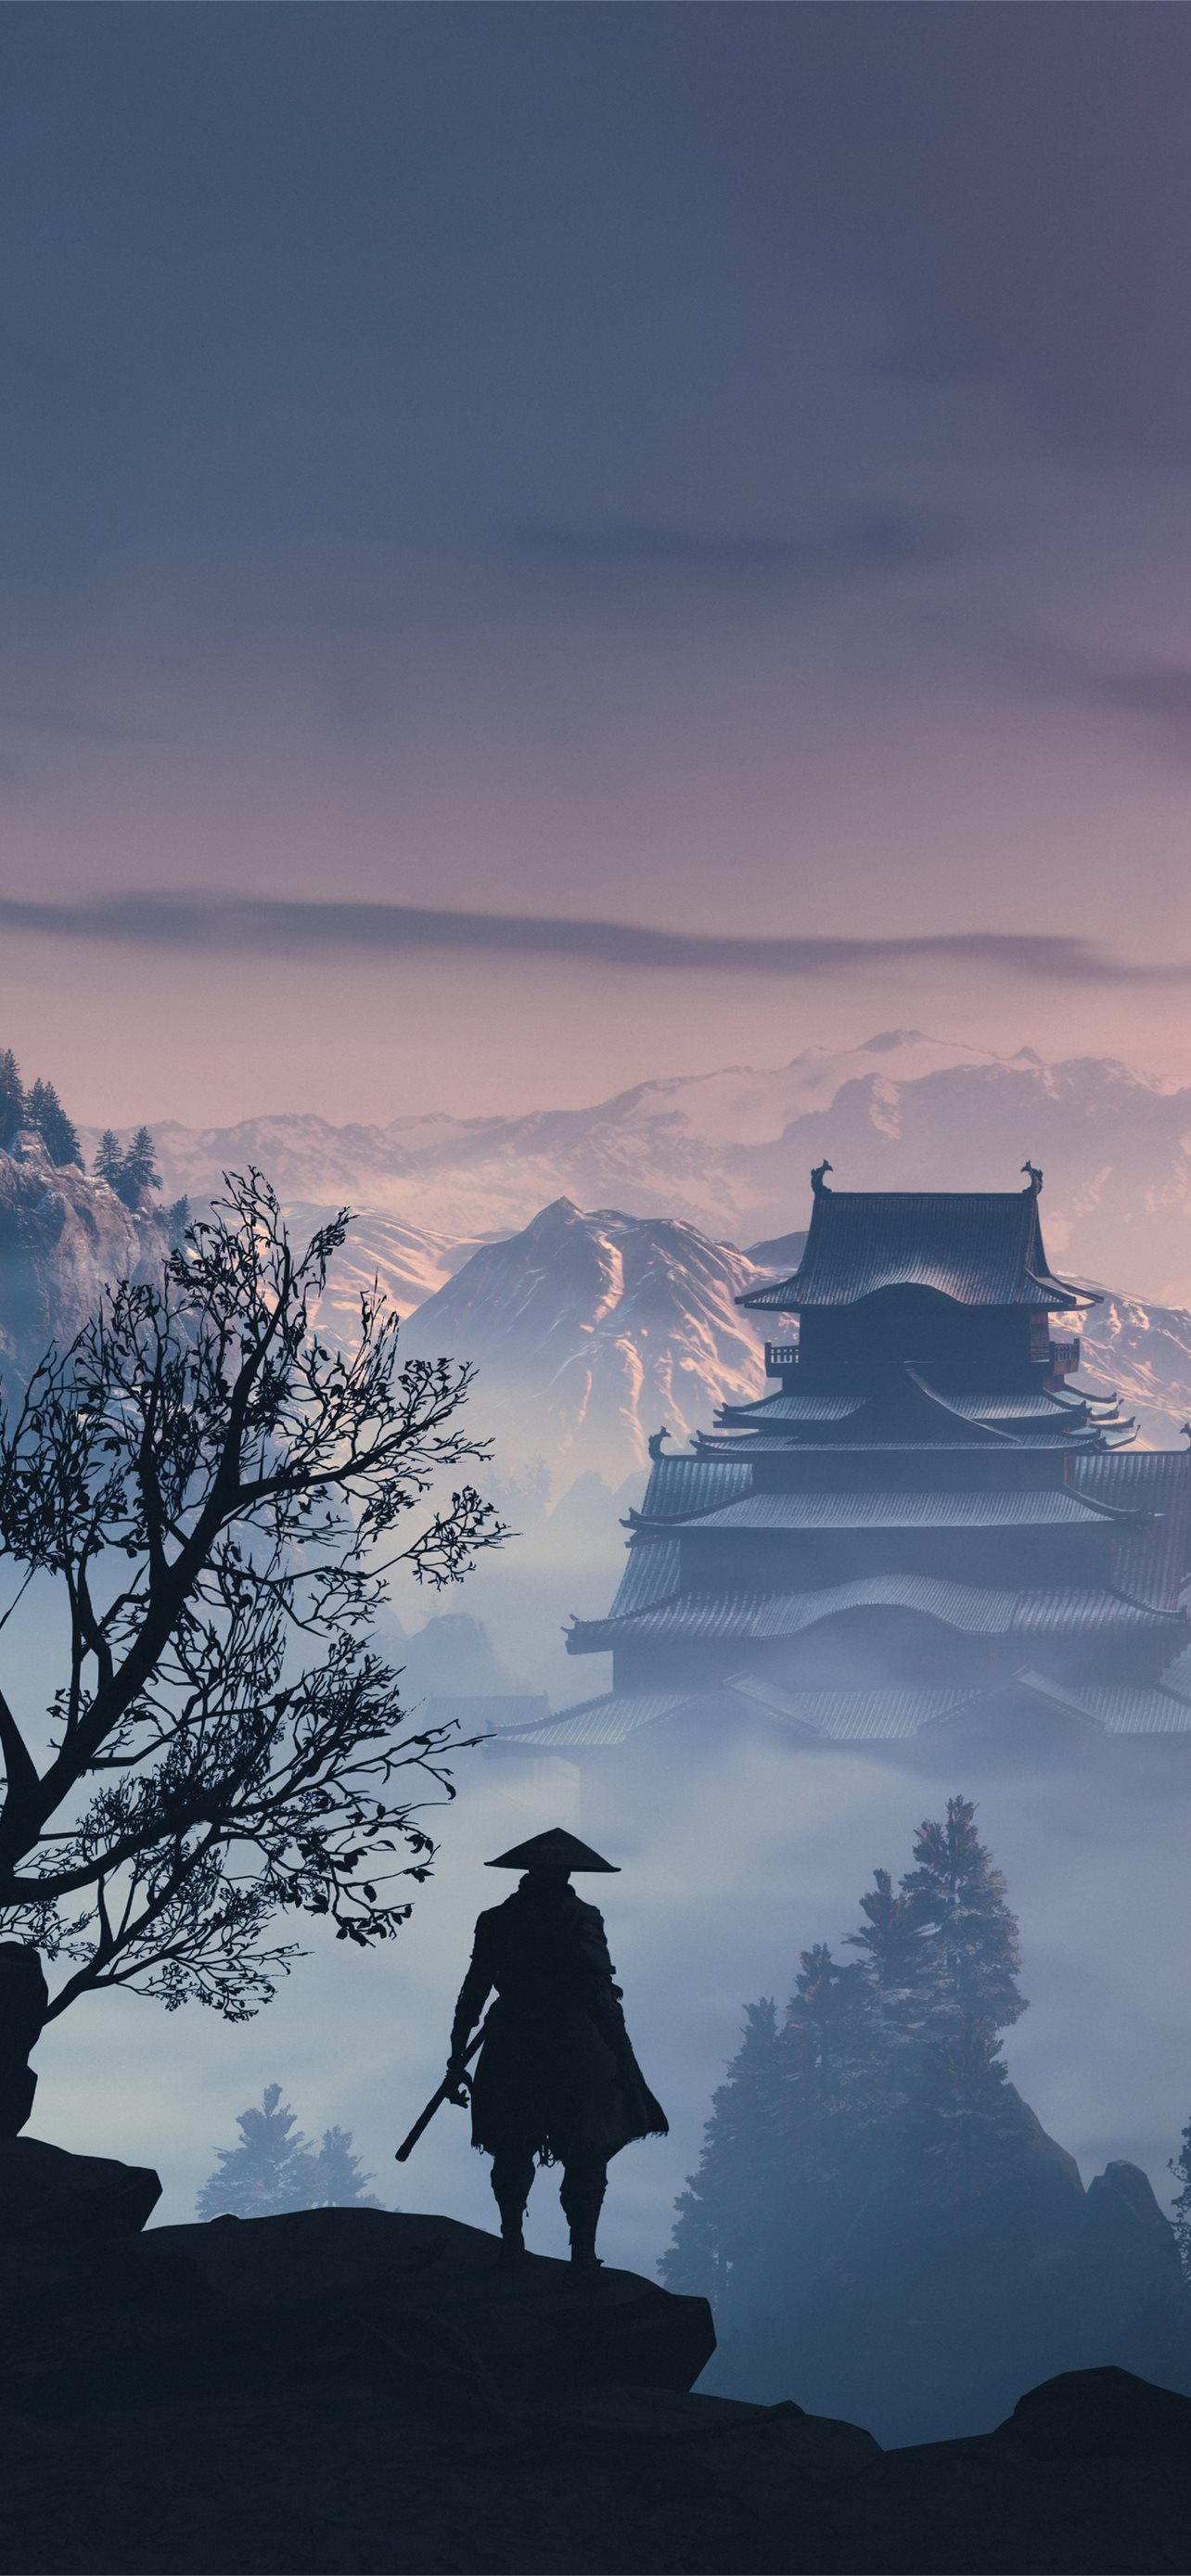 Sekiro Shadows Die Twice Wallpapers HD Sekiro Shadows Die Twice  Backgrounds Free Images Download